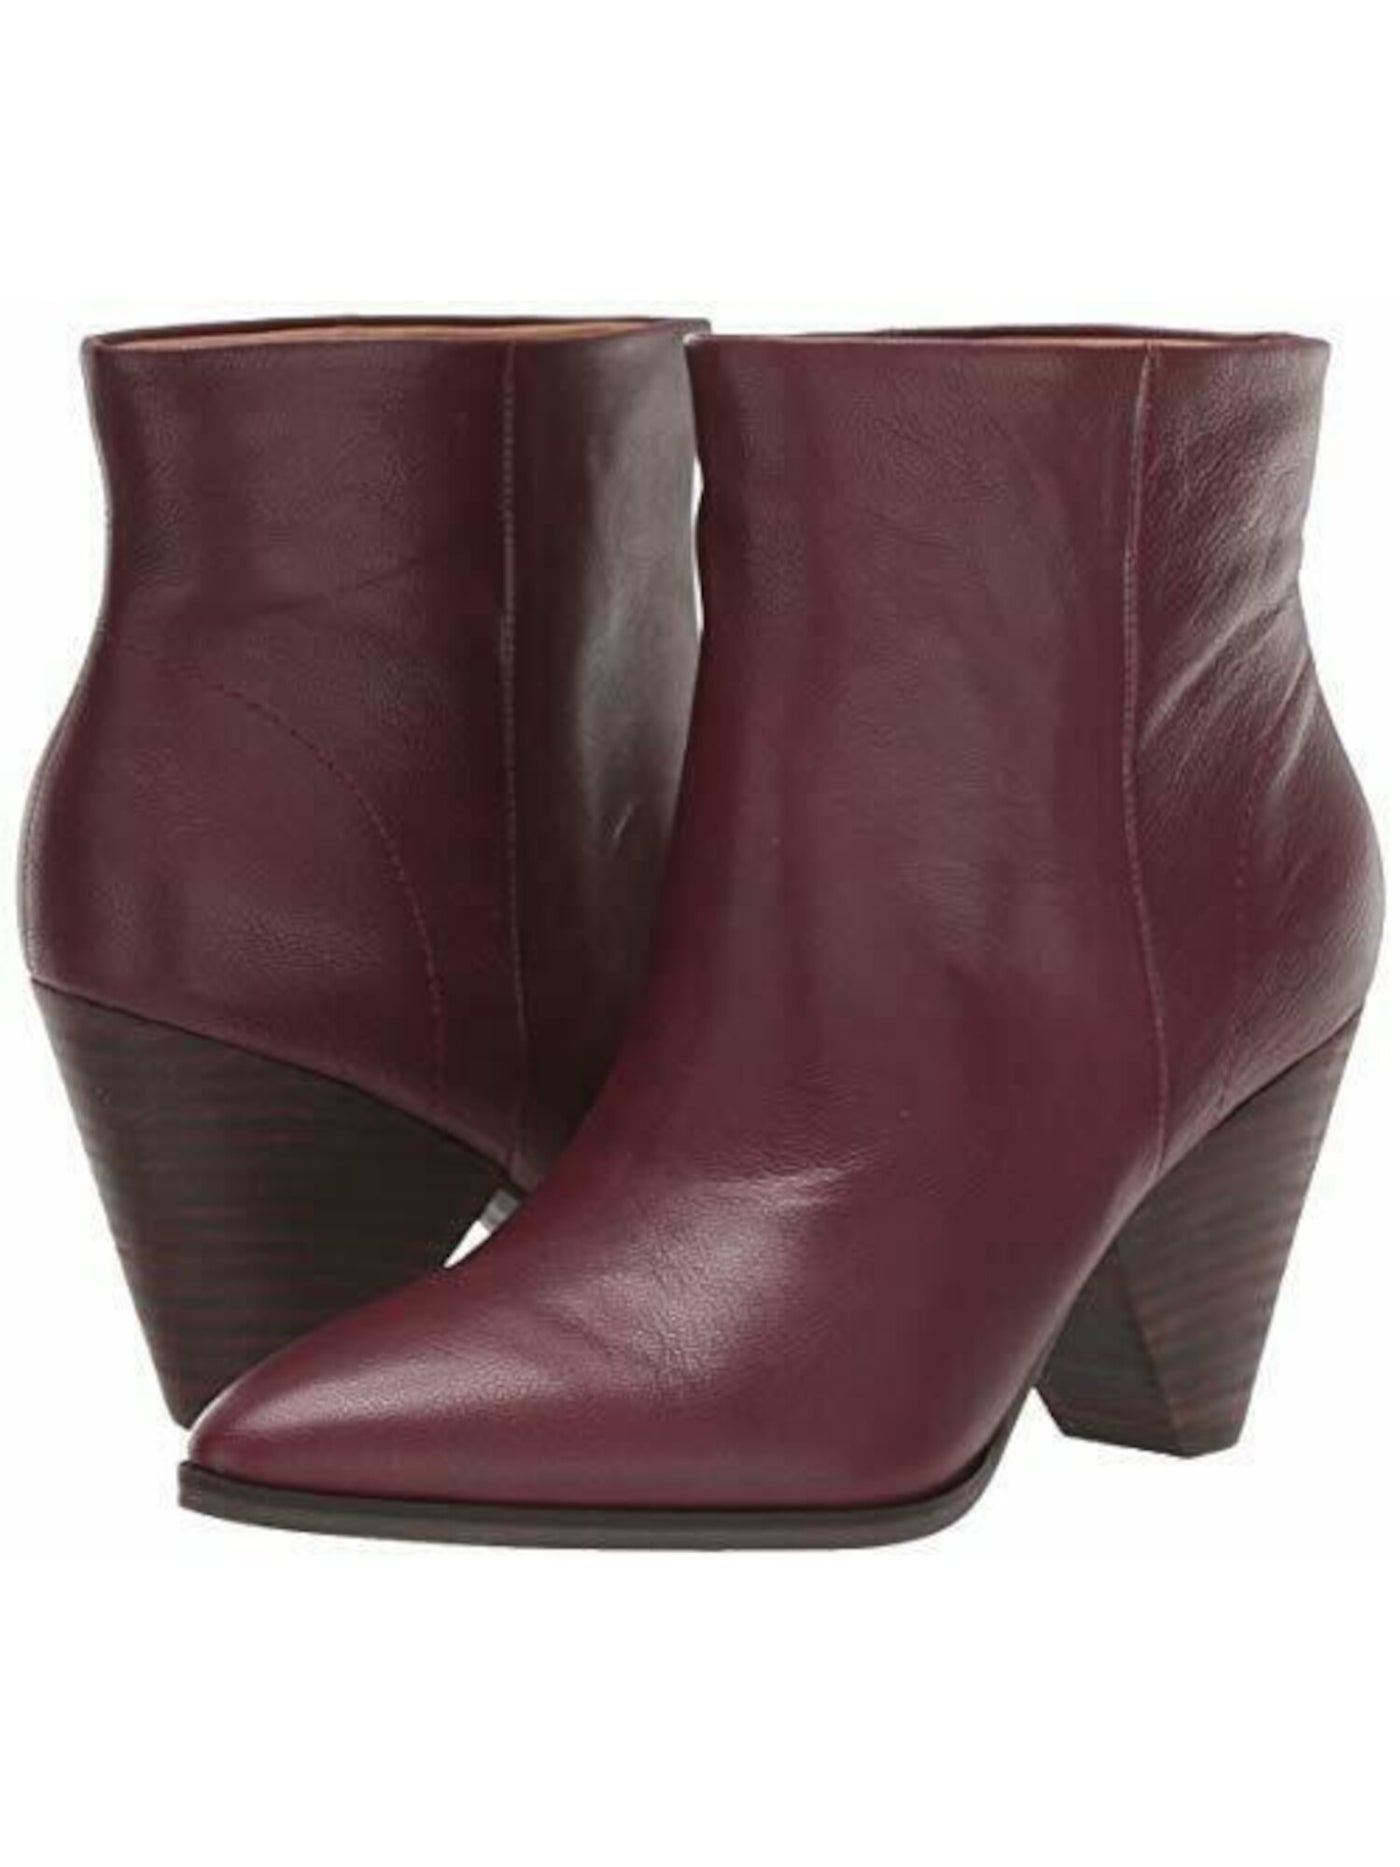 LUCKY BRAND Womens Maroon Pointed Toe Cone Heel Booties 5